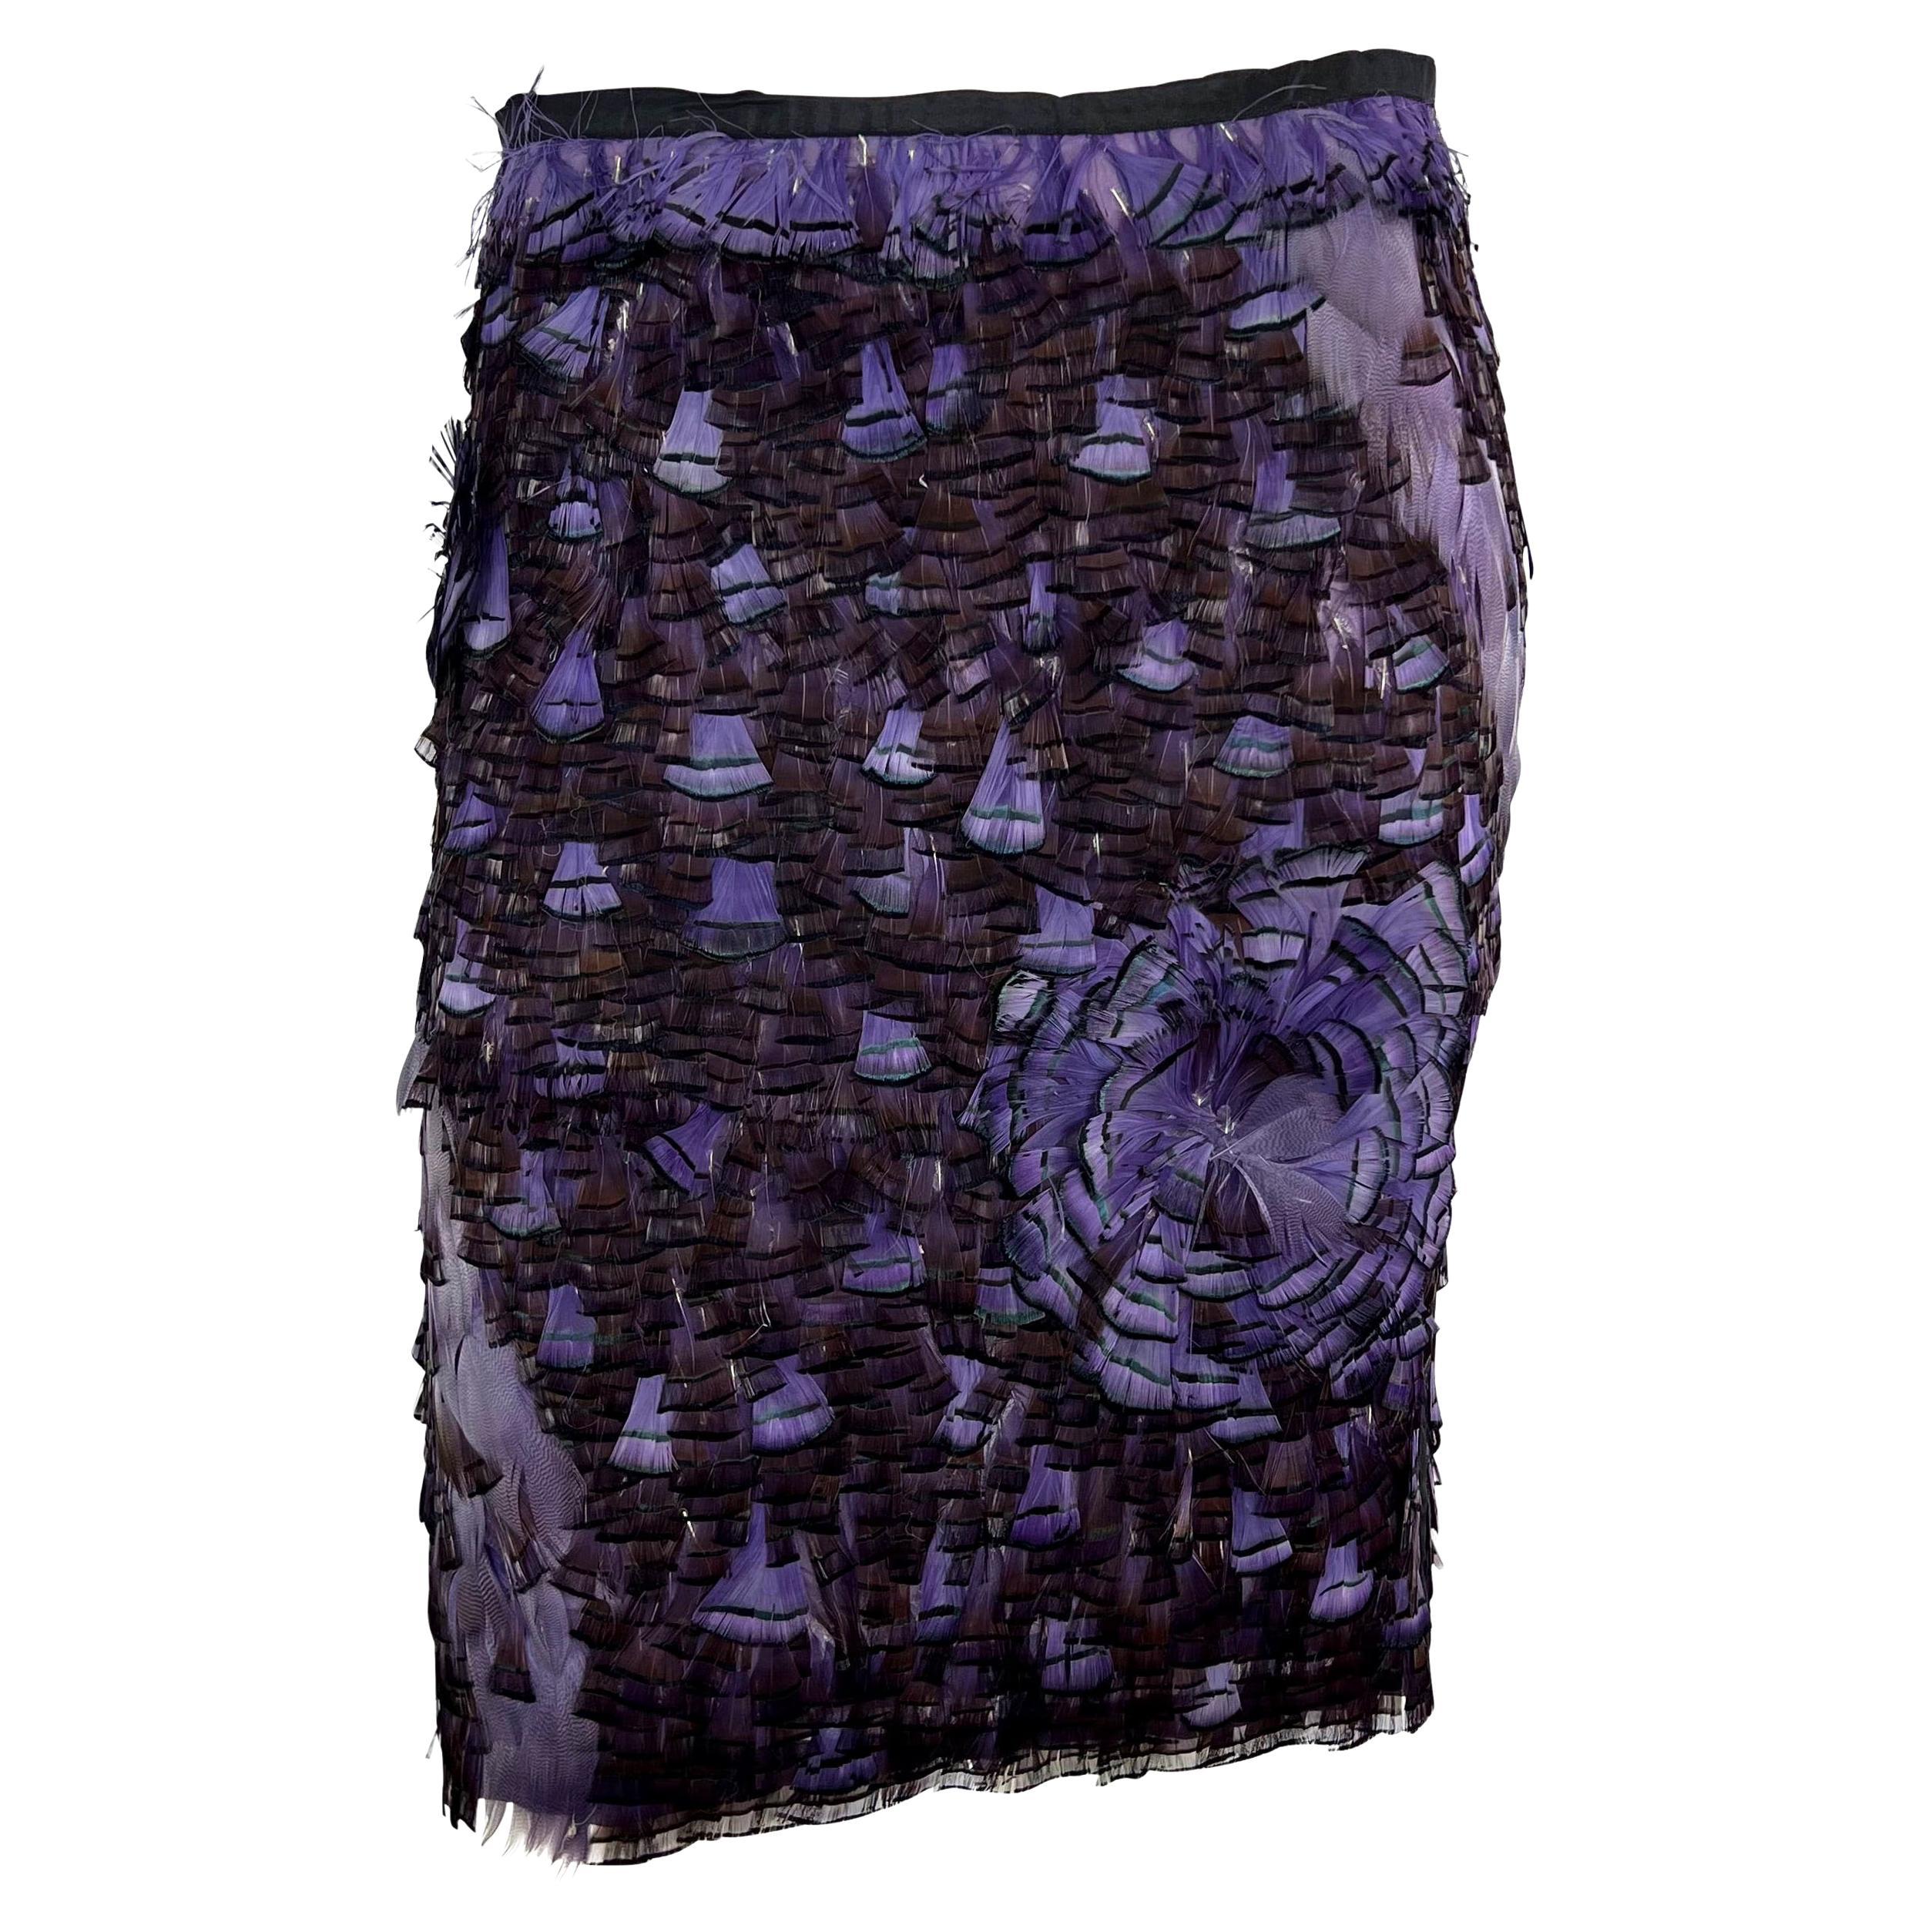 S/S 2003 Gucci by Tom Ford Purple Feather Embellished Silk Skirt  For Sale